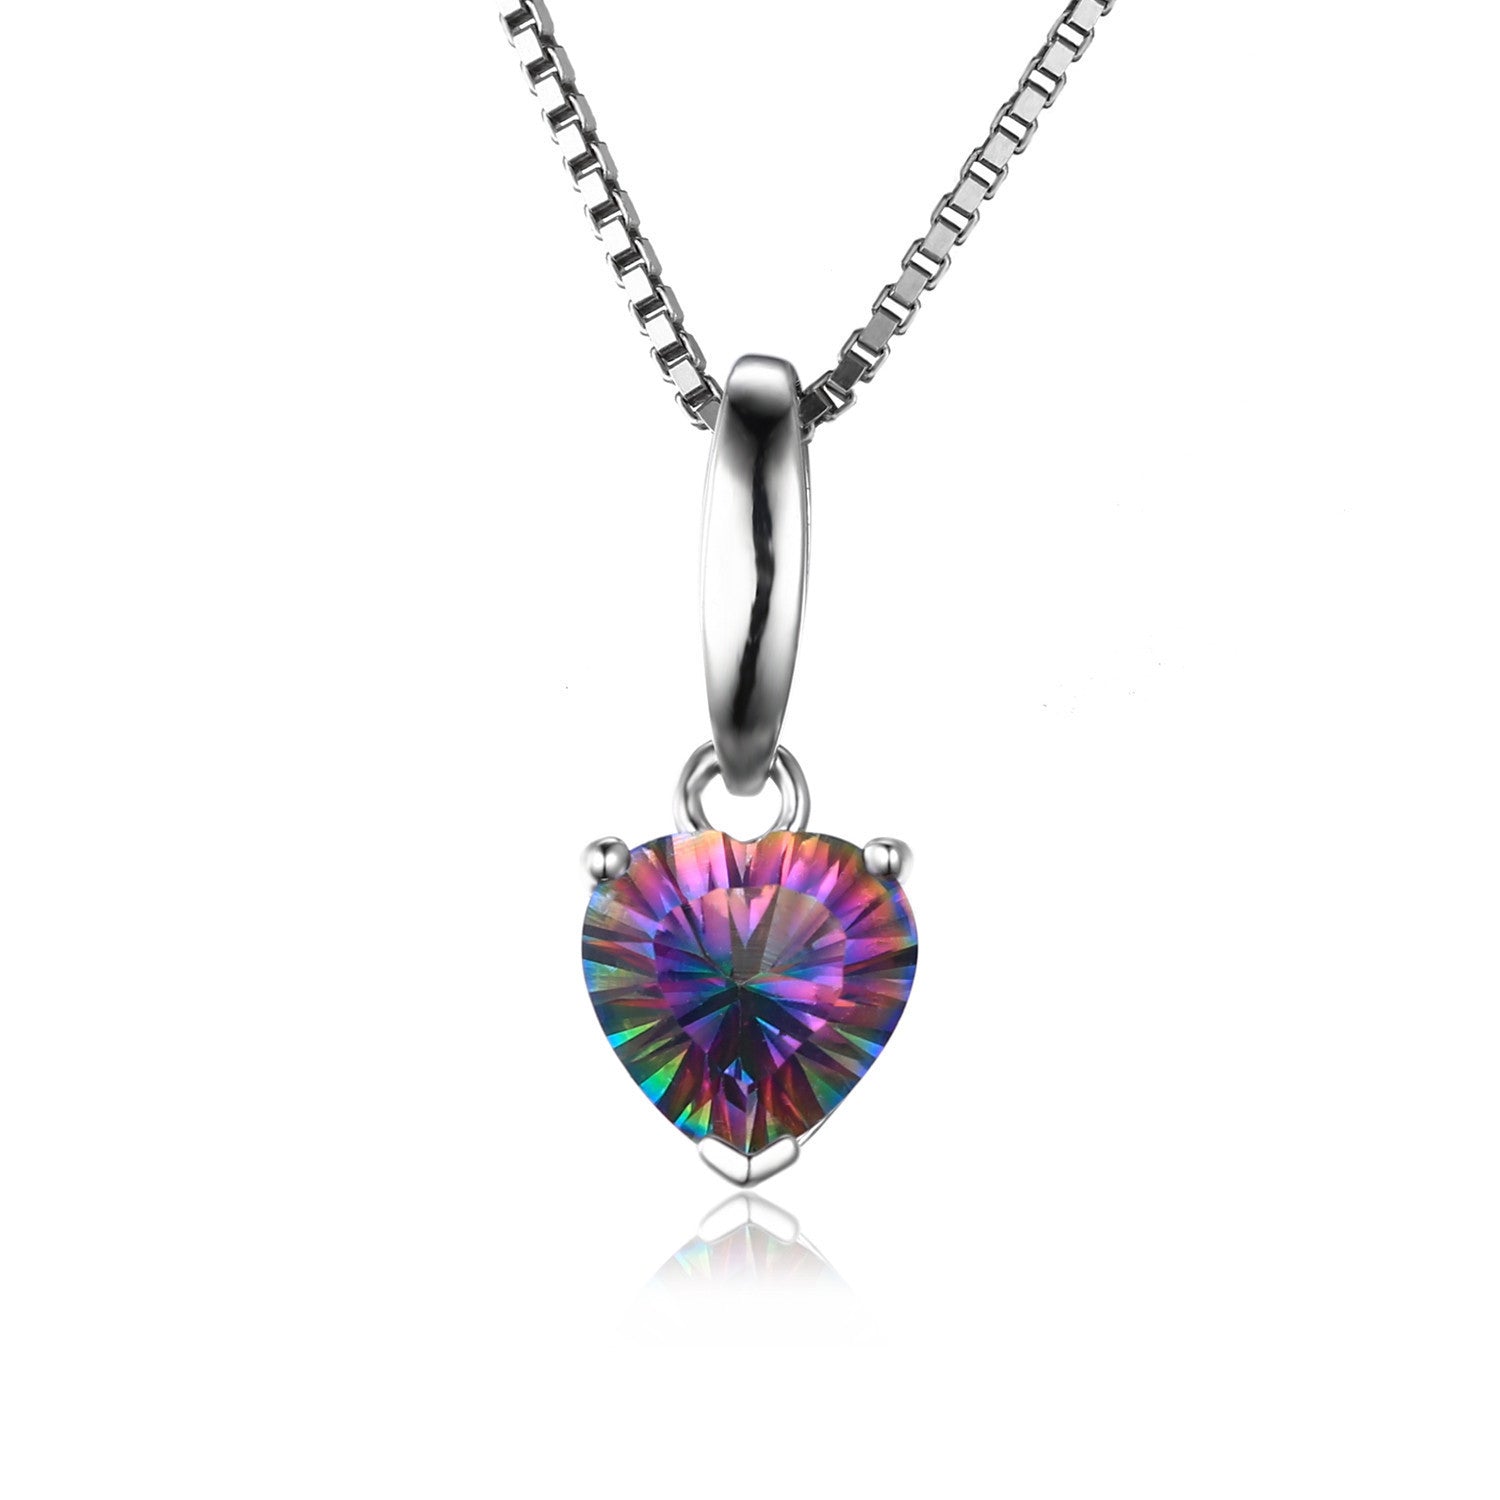 Heart Genuine Mystic Fire Rainbow Topaz Pendant Fine Jewelry Pure Solid 925 Sterling Silver Not include a Chain - CelebritystyleFashion.com.au online clothing shop australia